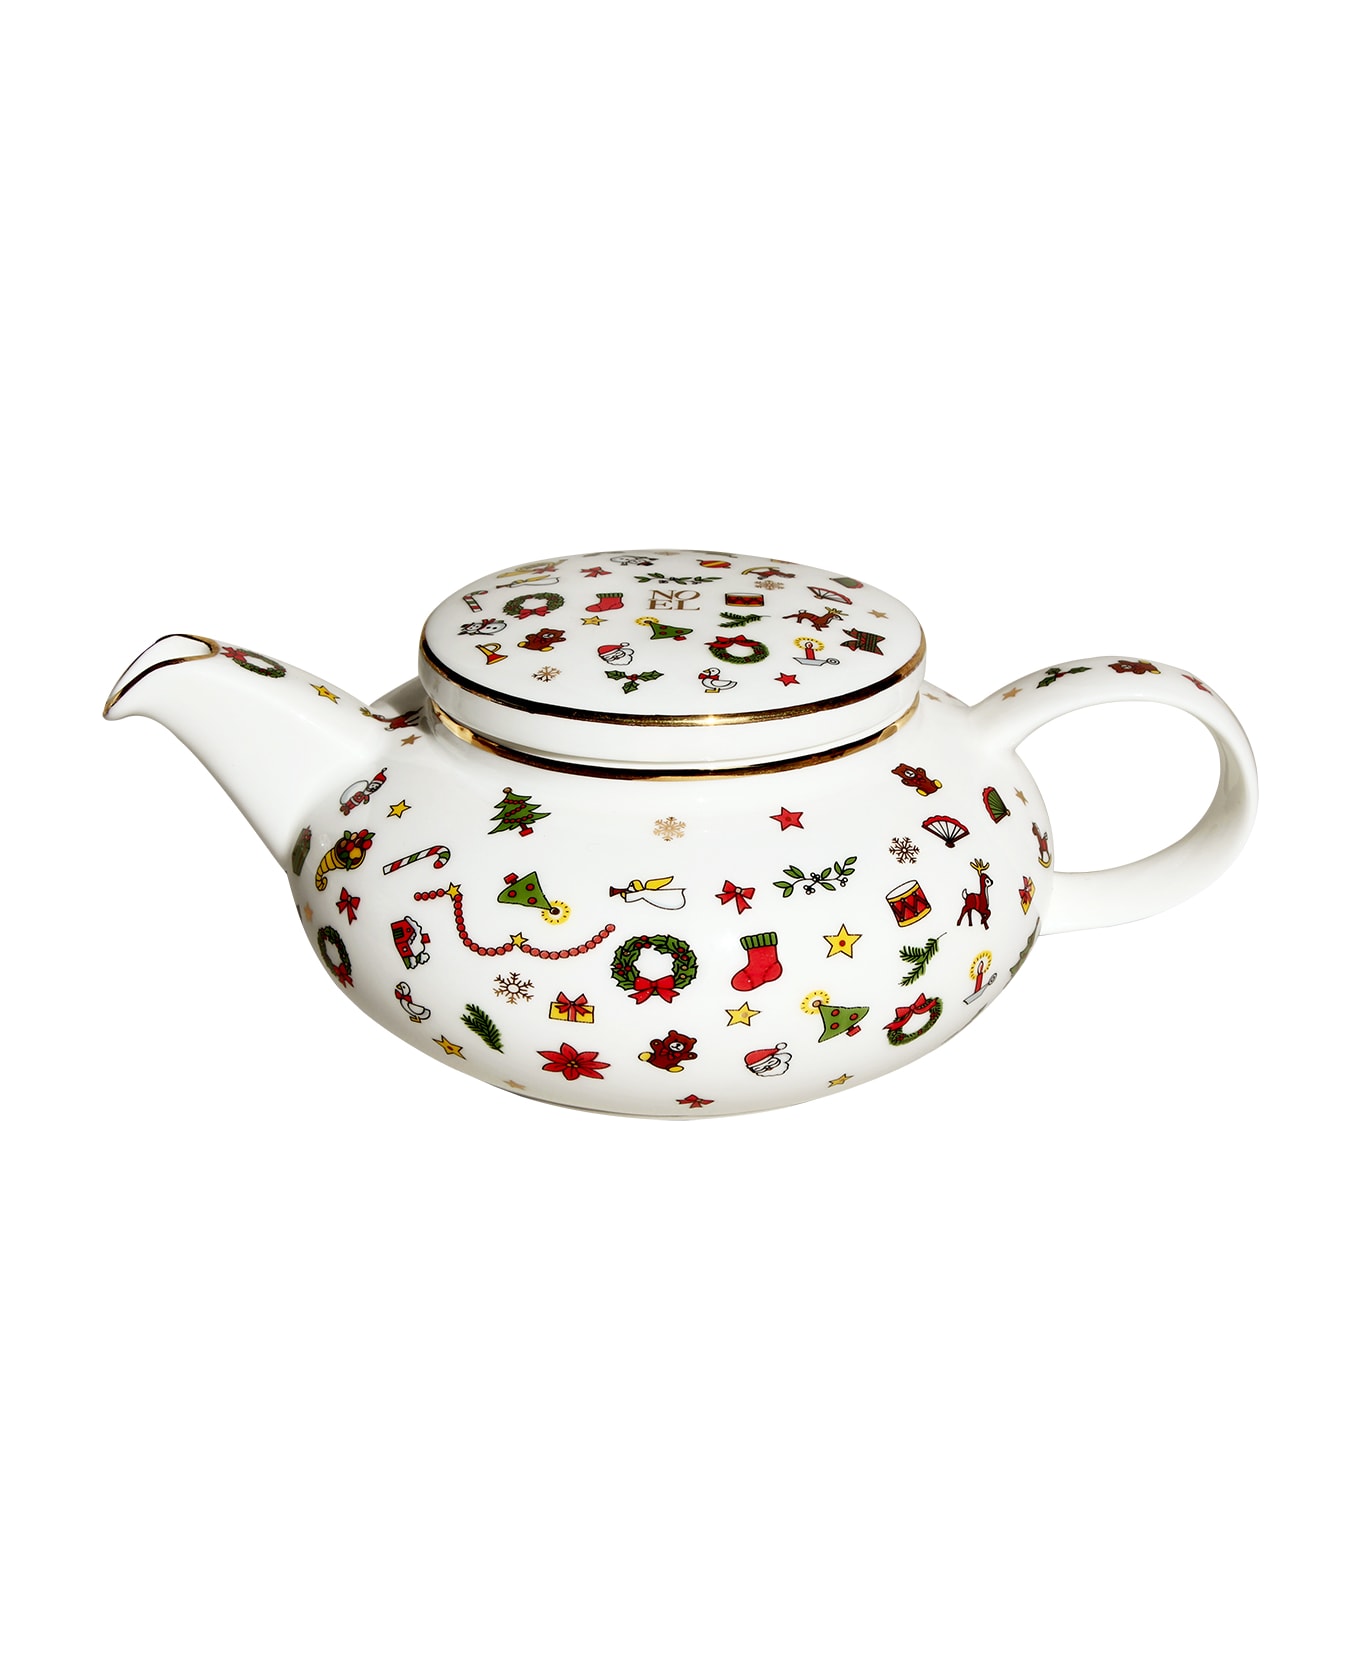 Taitù Teapot - Noel Oro Collection - Multicolor and Gold